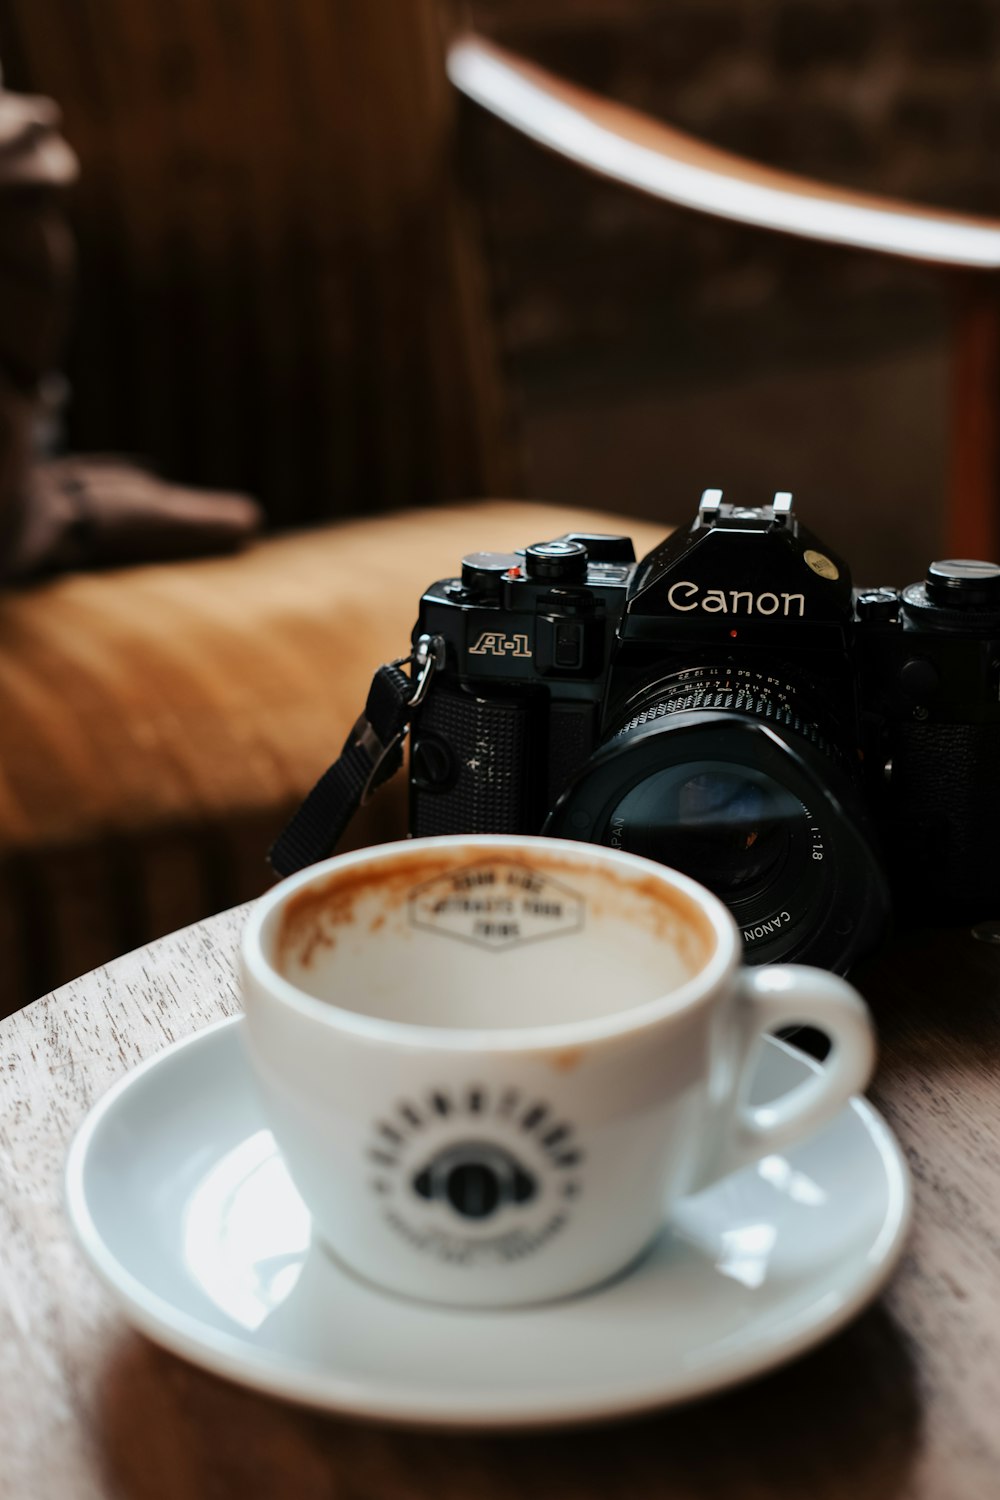 a camera and a cup of coffee on a table